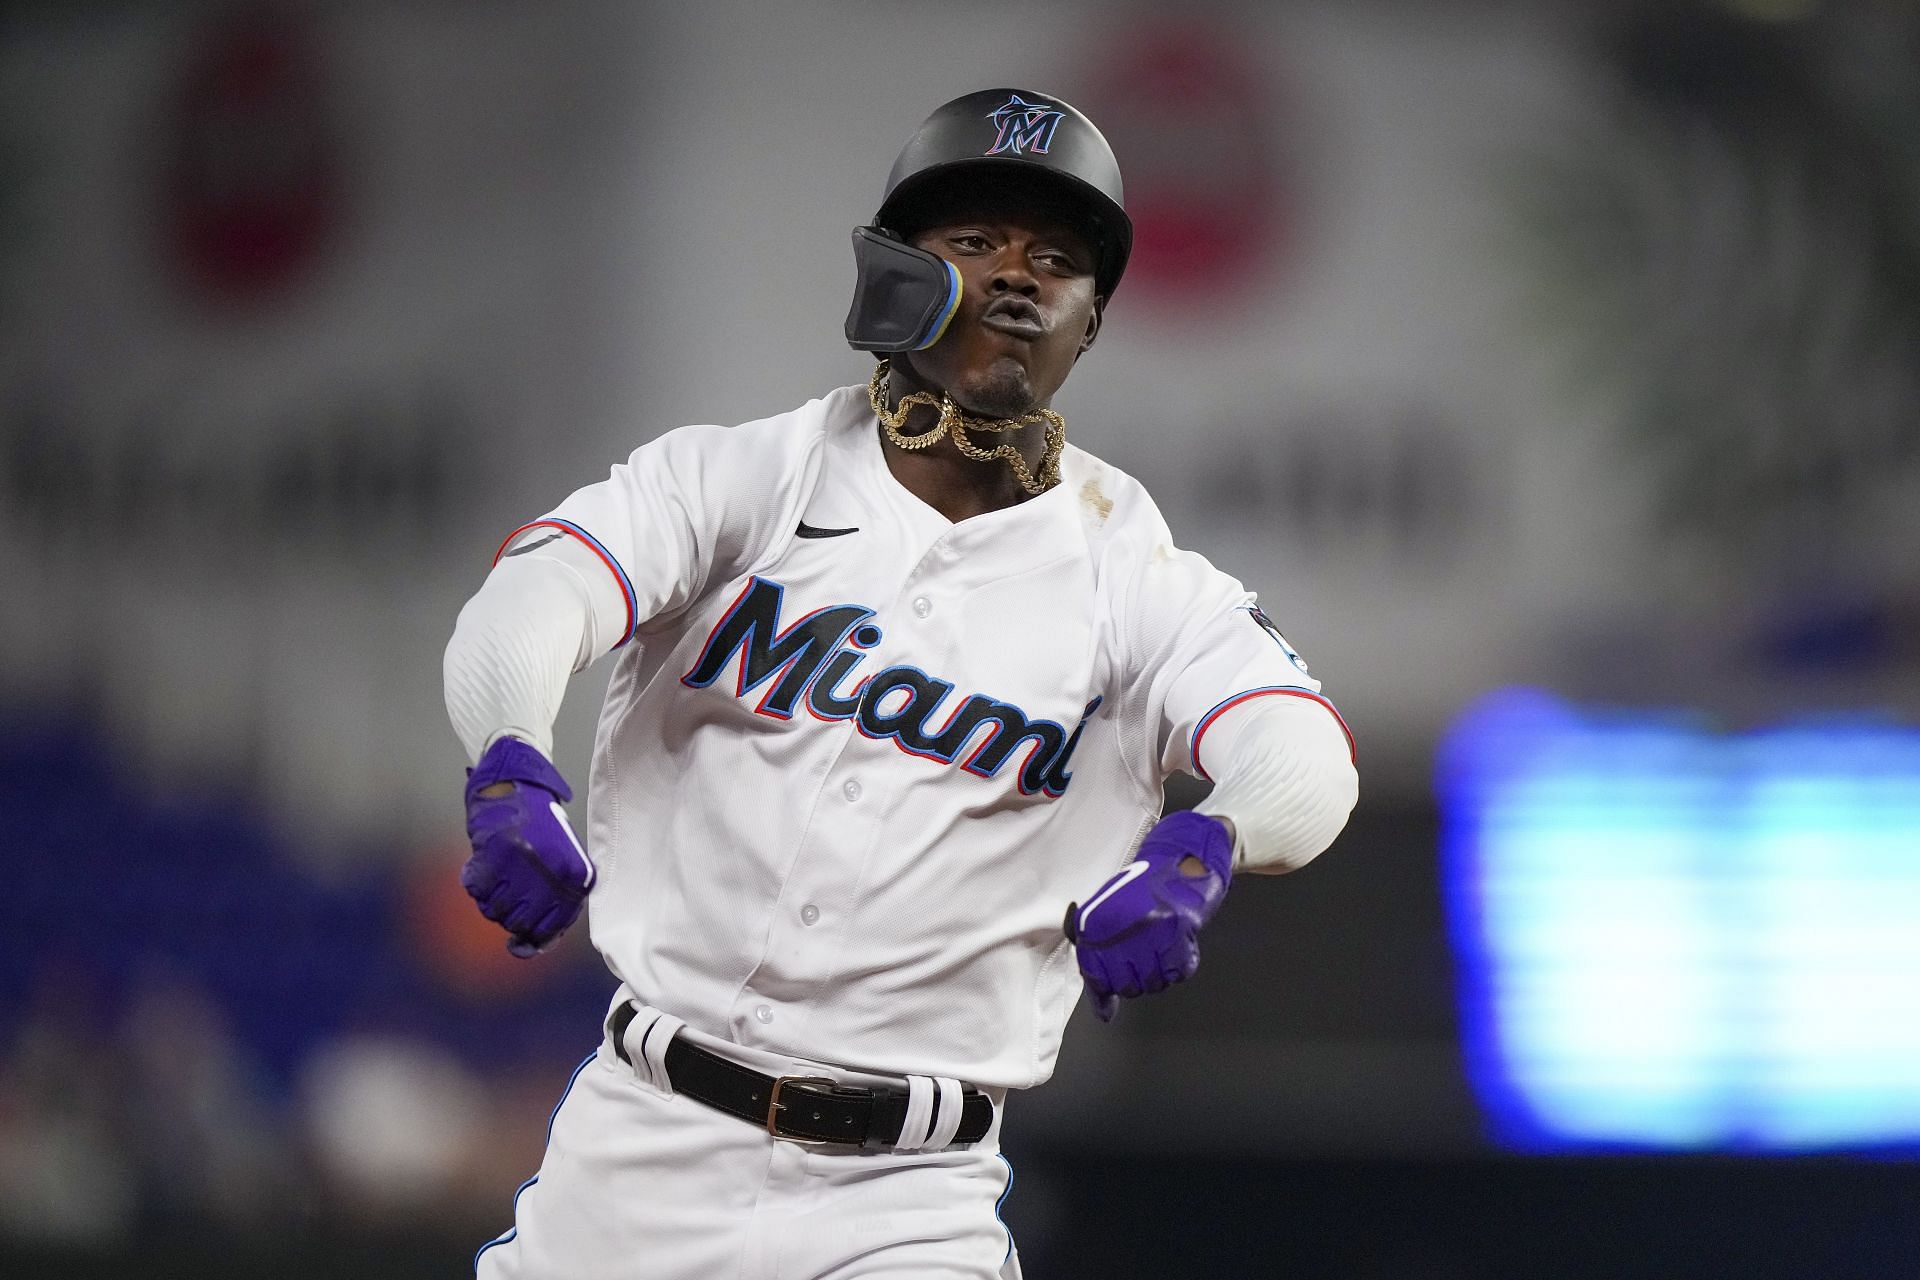 Can Marlins trust Jazz Chisholm Jr. to be face of their franchise